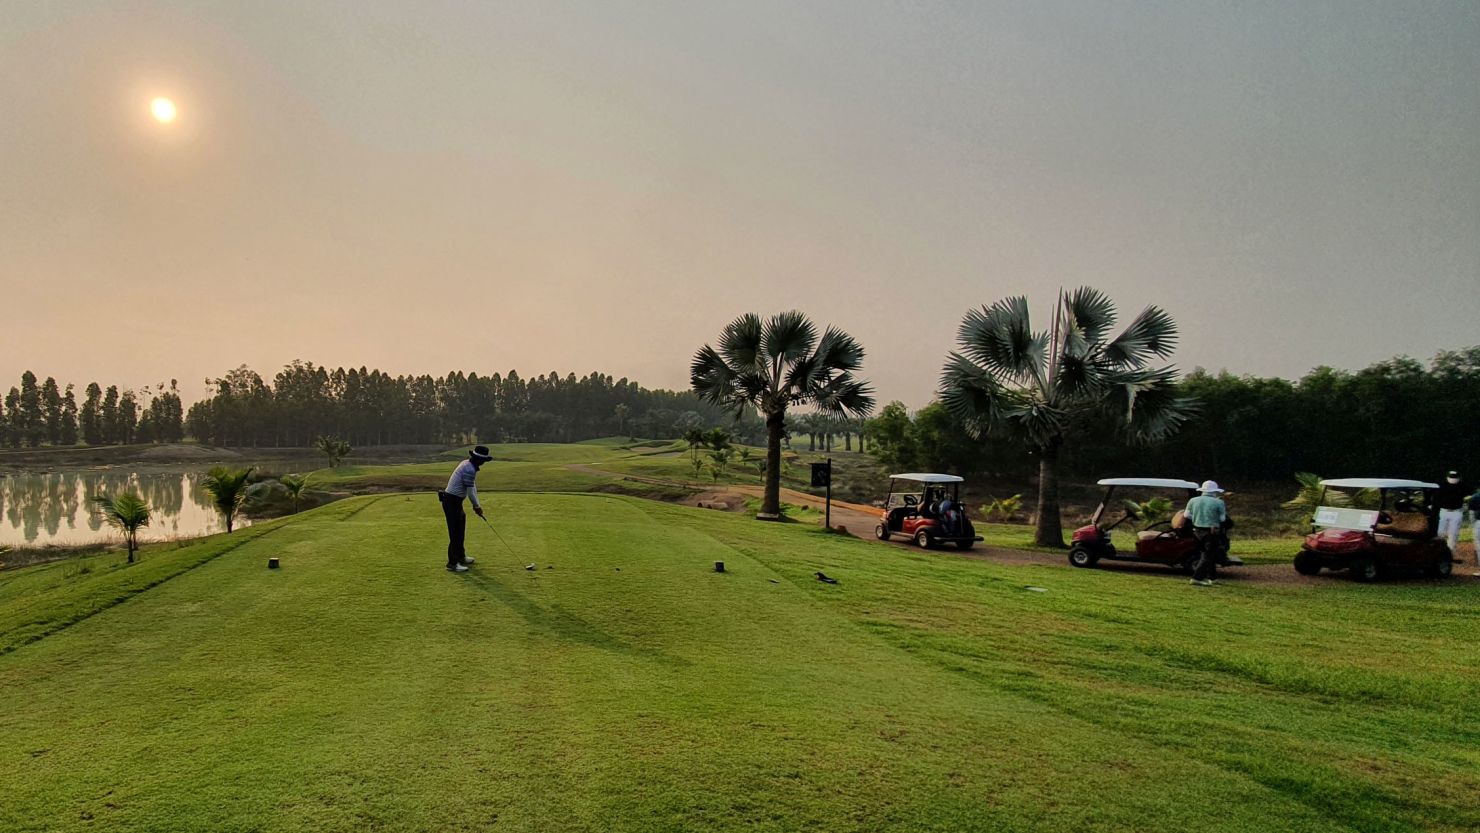 A man, who is among the first group of South Korean tourists to arrive in Thailand under a "golf quarantine" programme amid the coronavirus disease (COVID-19) pandemic, plays golf during his 15-day quarantine at the Artitaya Country Club in Nakhon Nayok, Thailand February 25, 2021. Heo Kwang-eum / Handout via REUTERS ATTENTION EDITORS - THIS IMAGE WAS PROVIDED BY A THIRD PARTY. NO RESALES. NO ARCHIVE.